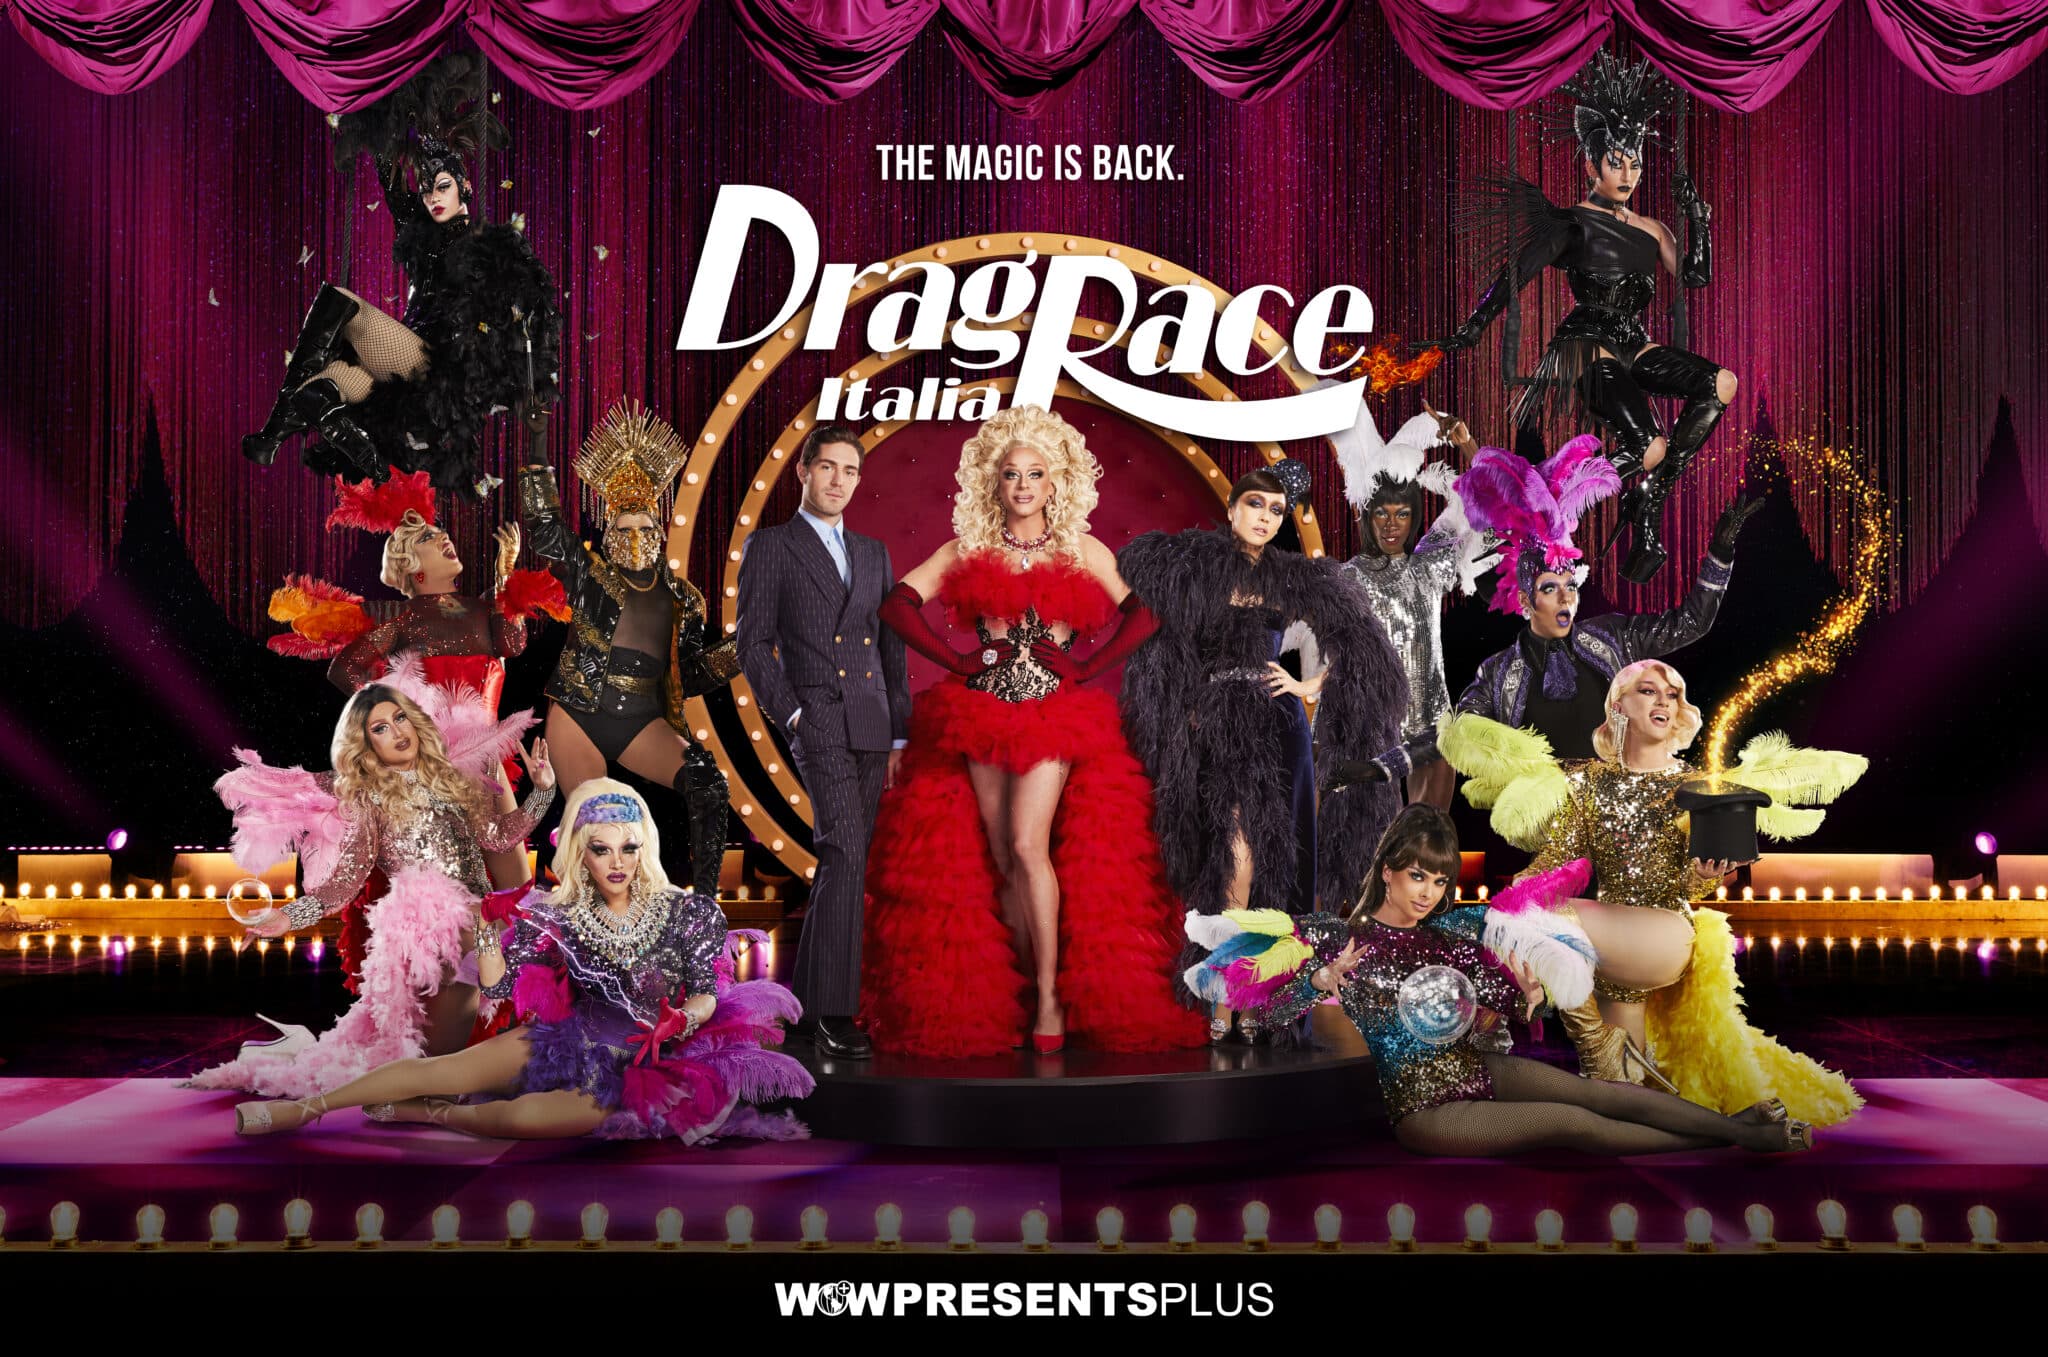 Drag Race Italia Ru-veals season two queens including Big Brother star and Barack Obama tribute